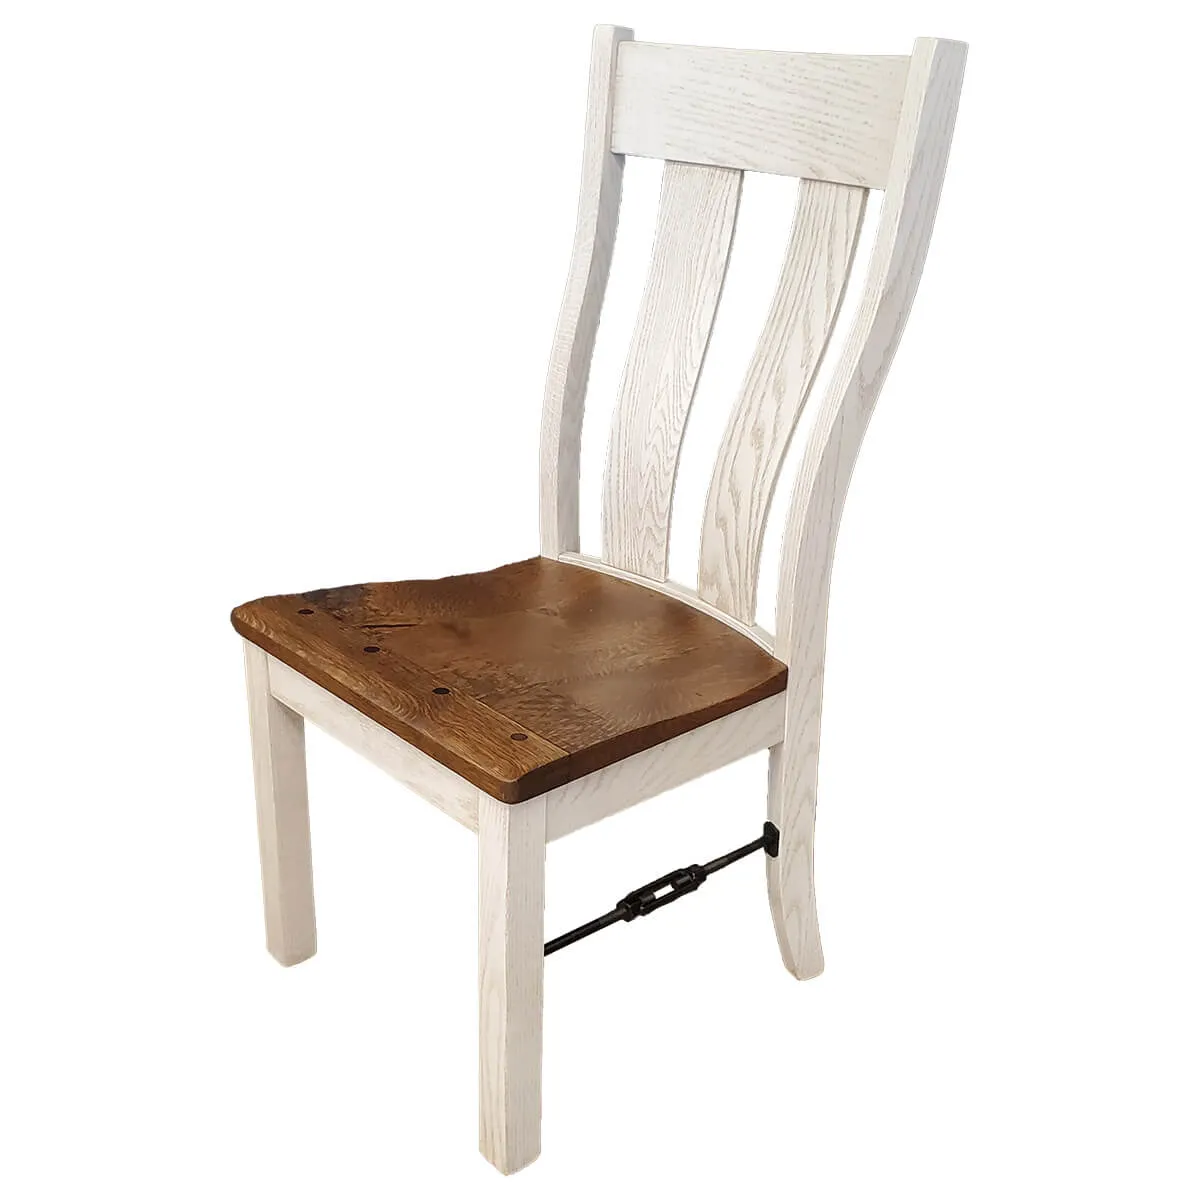 Urbana Side Chair with Breadboard Seat and Turnbuckles